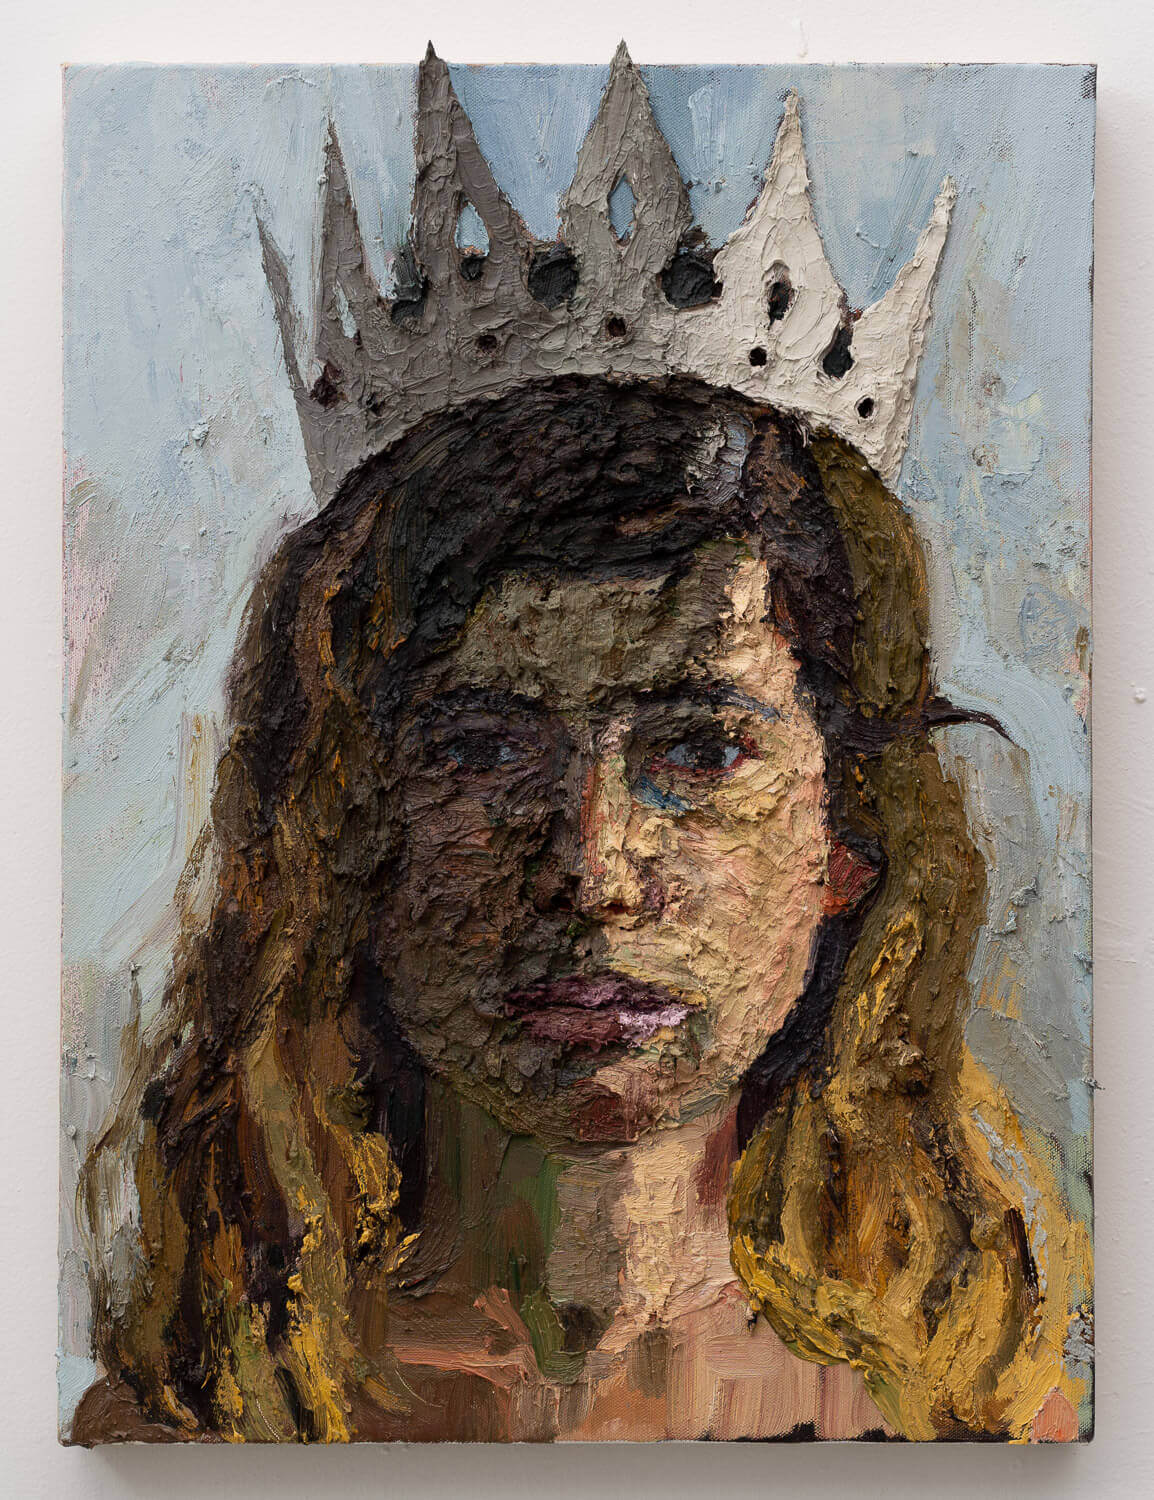 Avital Burg, Birthday self portrait with gray crown, 2020, oil on canvas, 24 x 18 inches (courtesy of the artist)